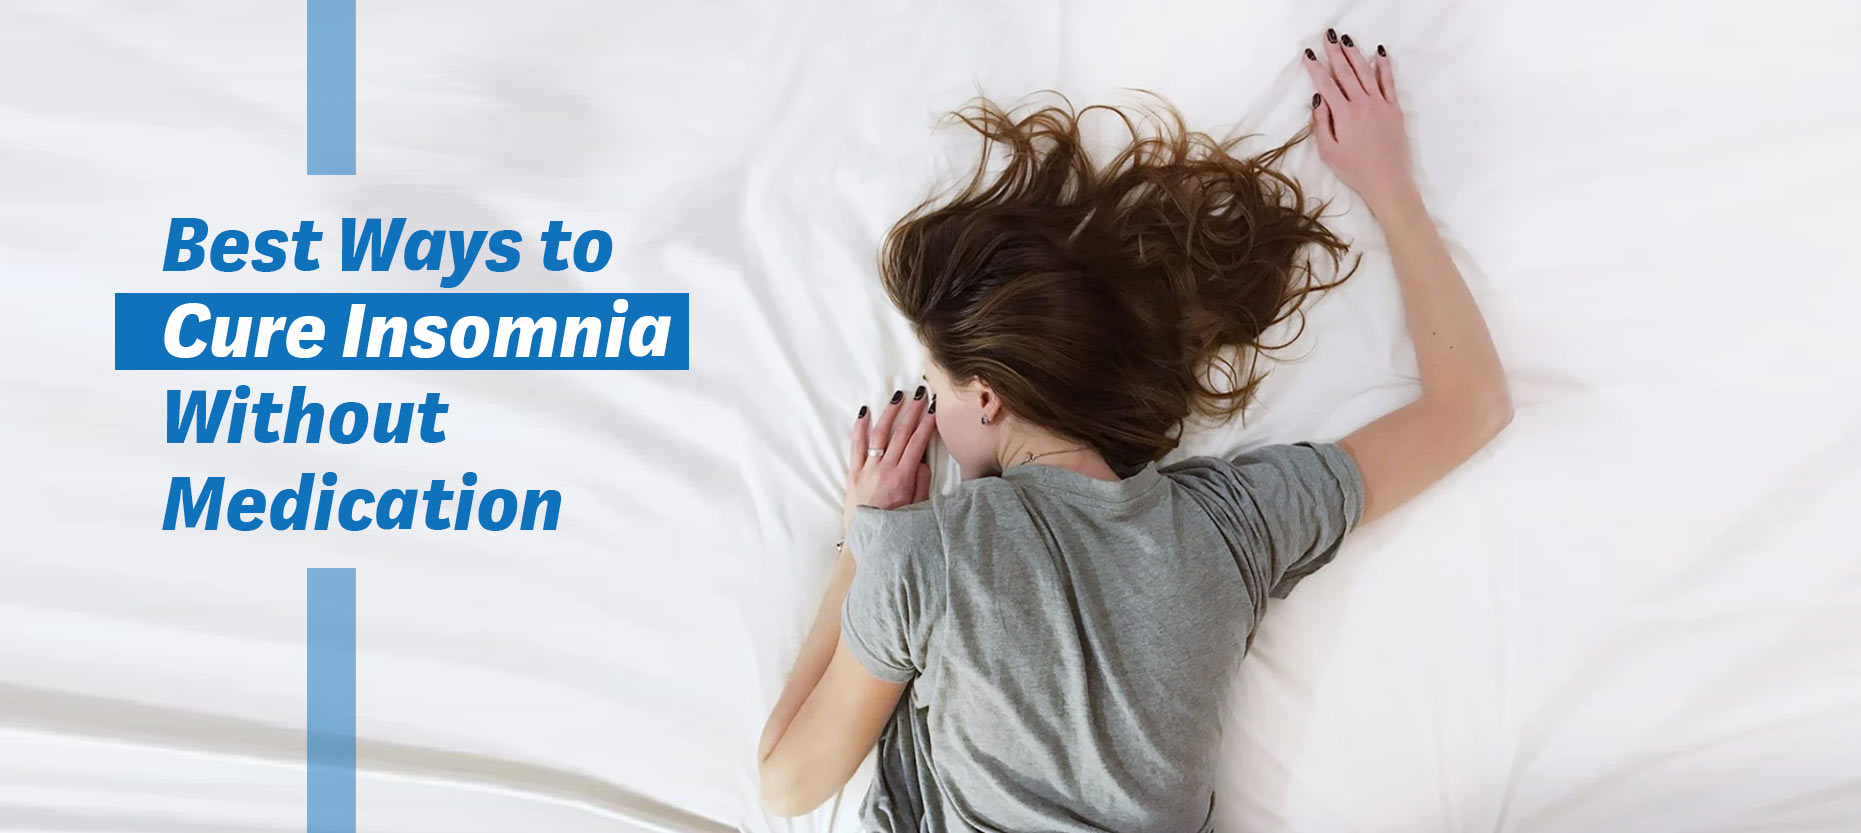 Cure Insomnia Without Medication